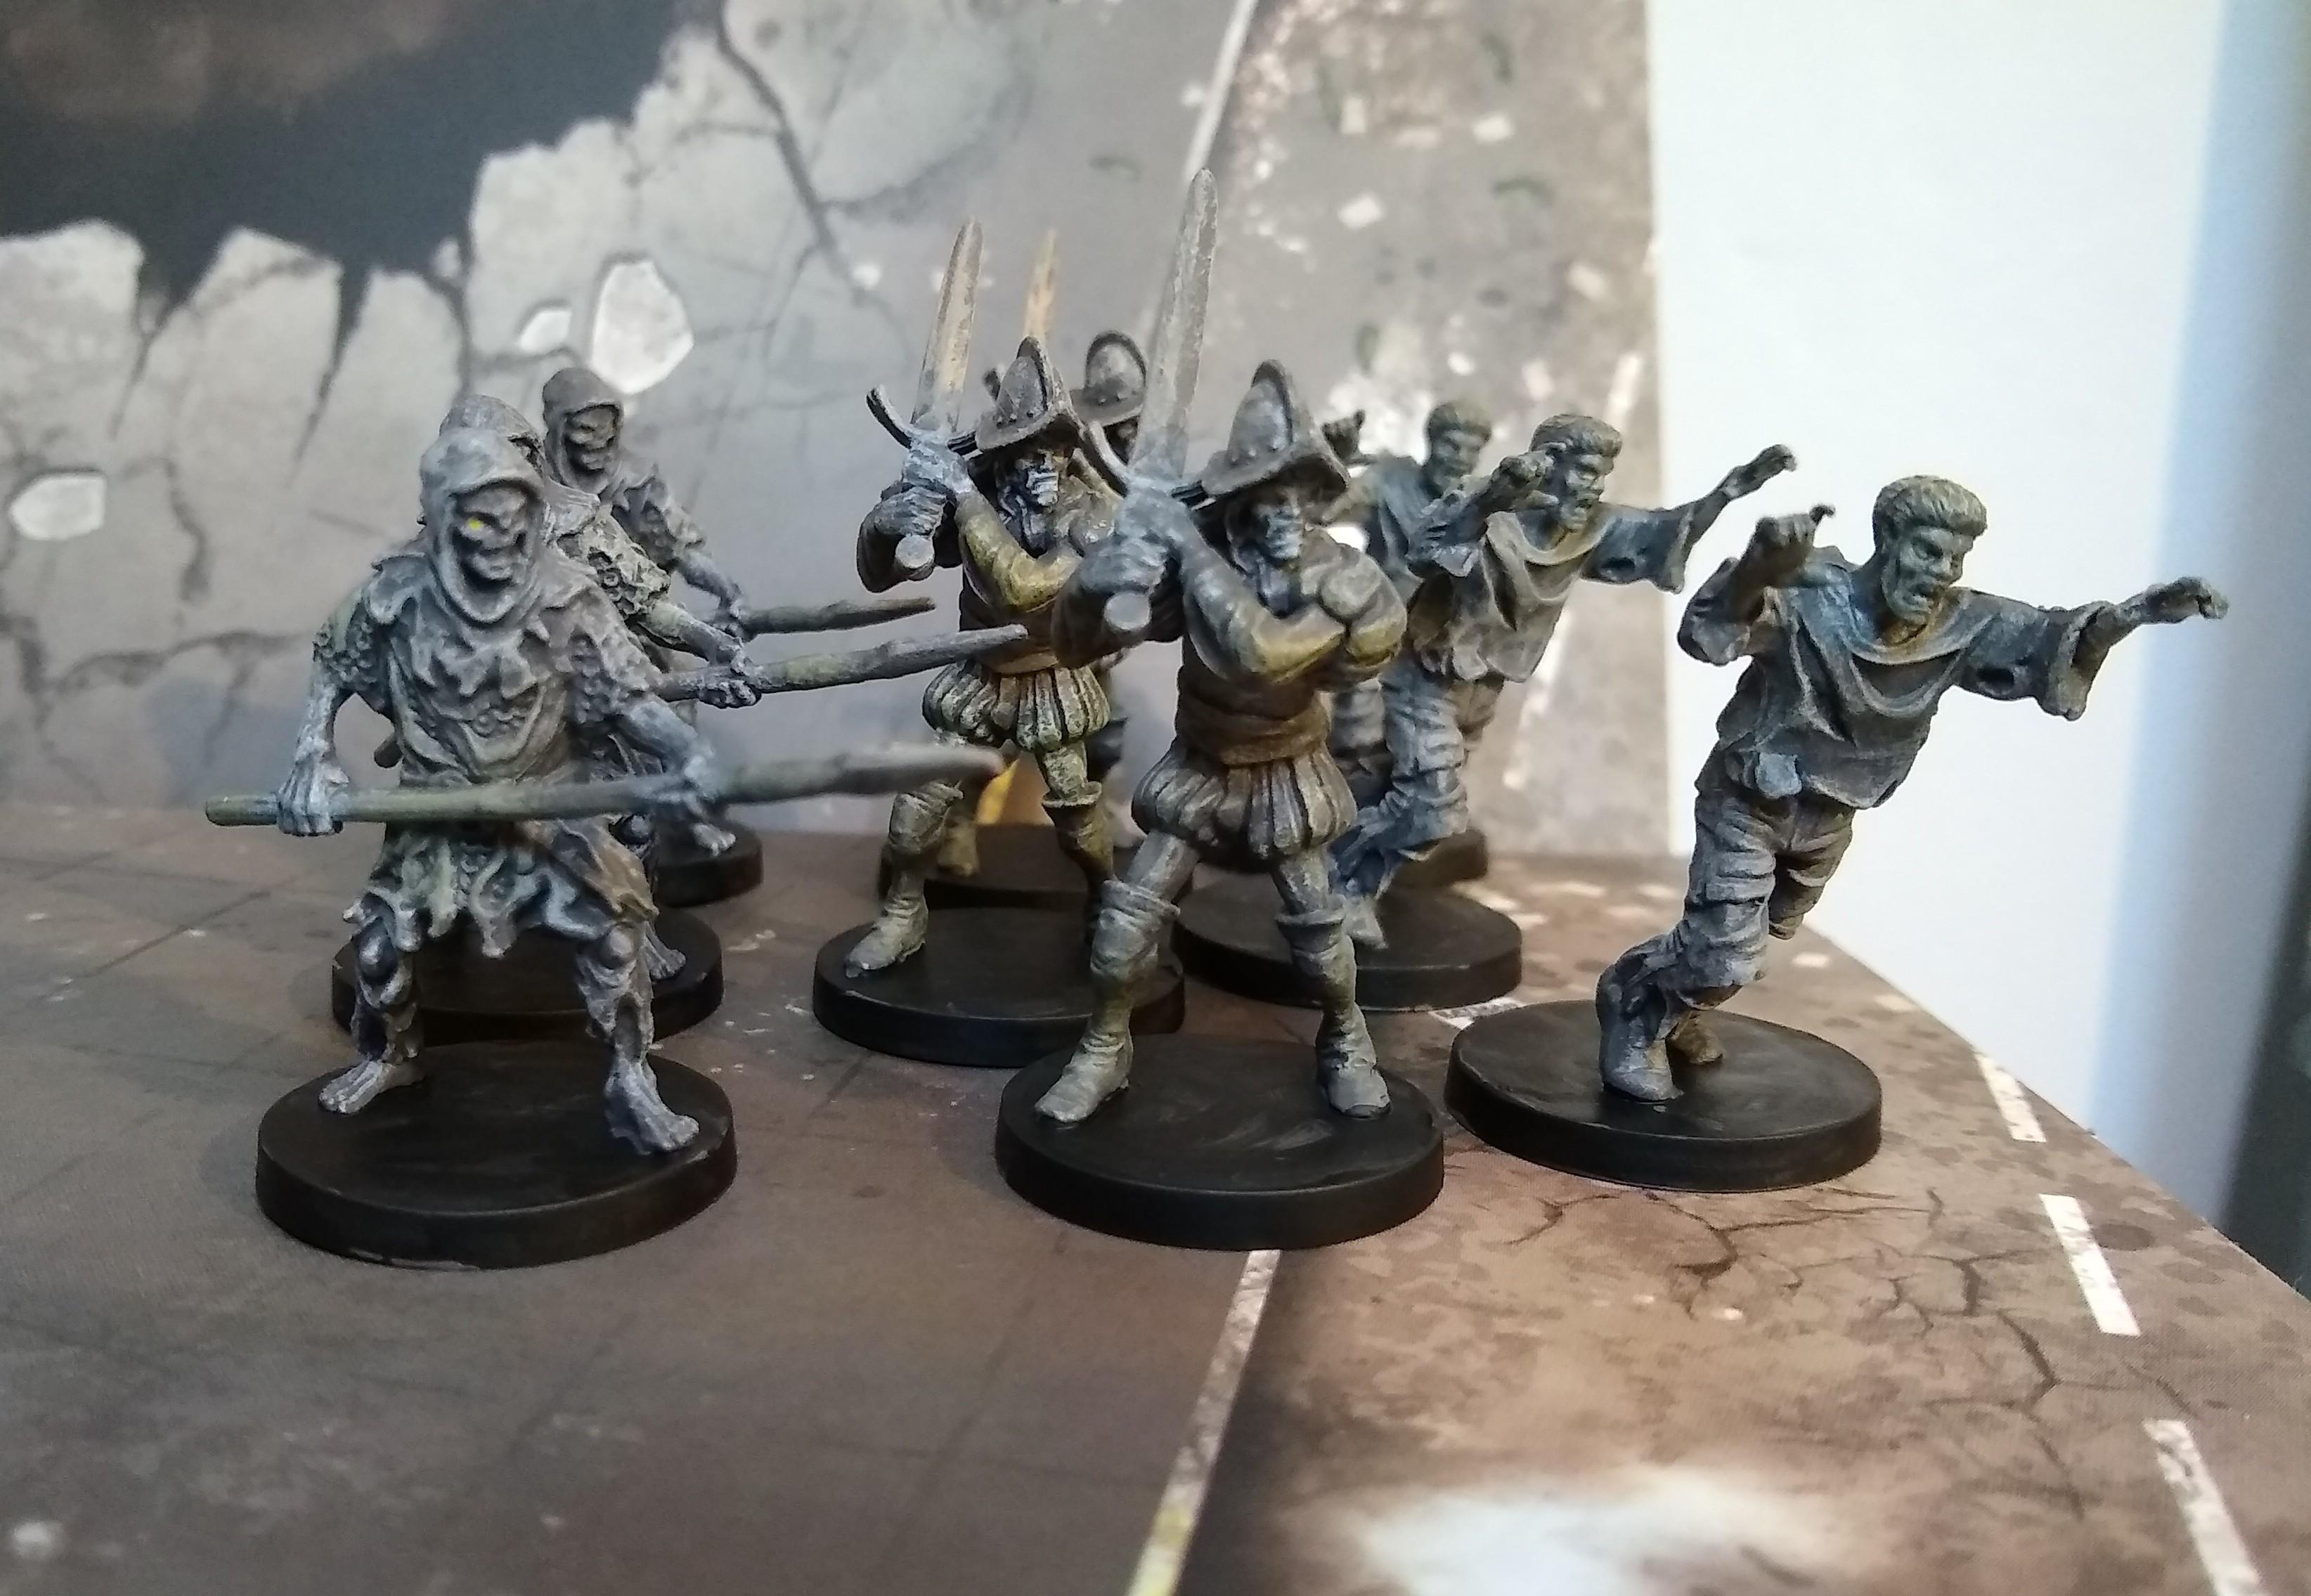 Undead spearmen, conquistadors and hungry dead